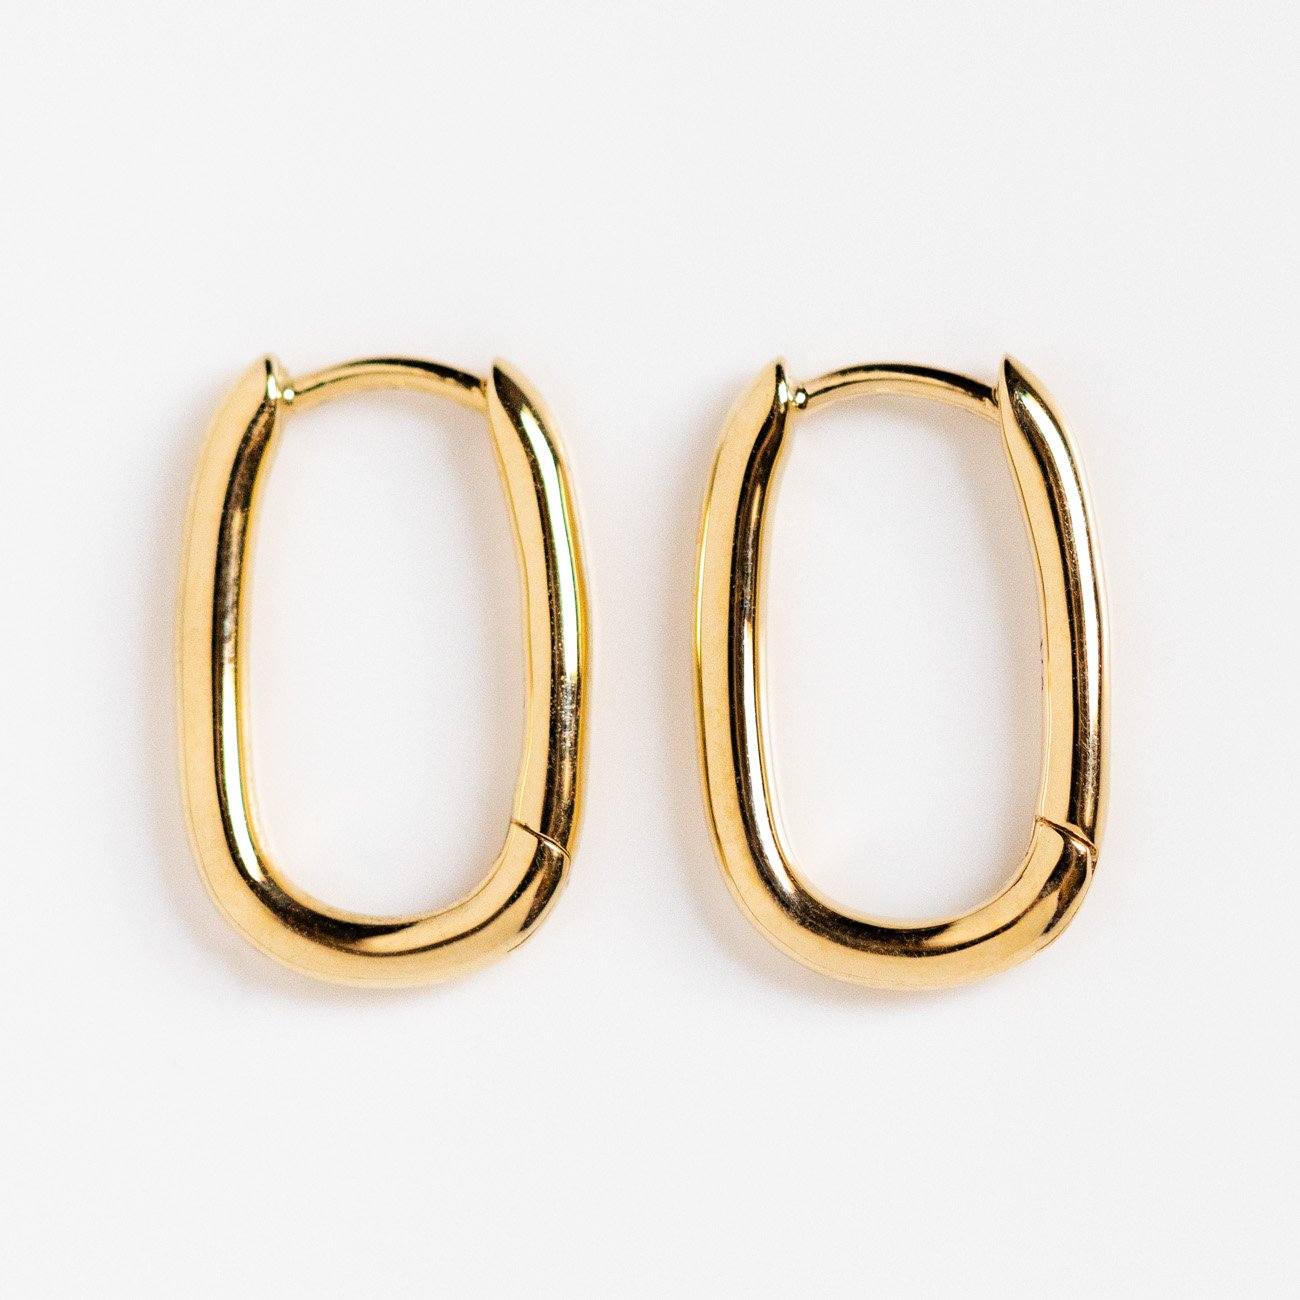 Local Eclectic Gold Oval Hoop Earrings